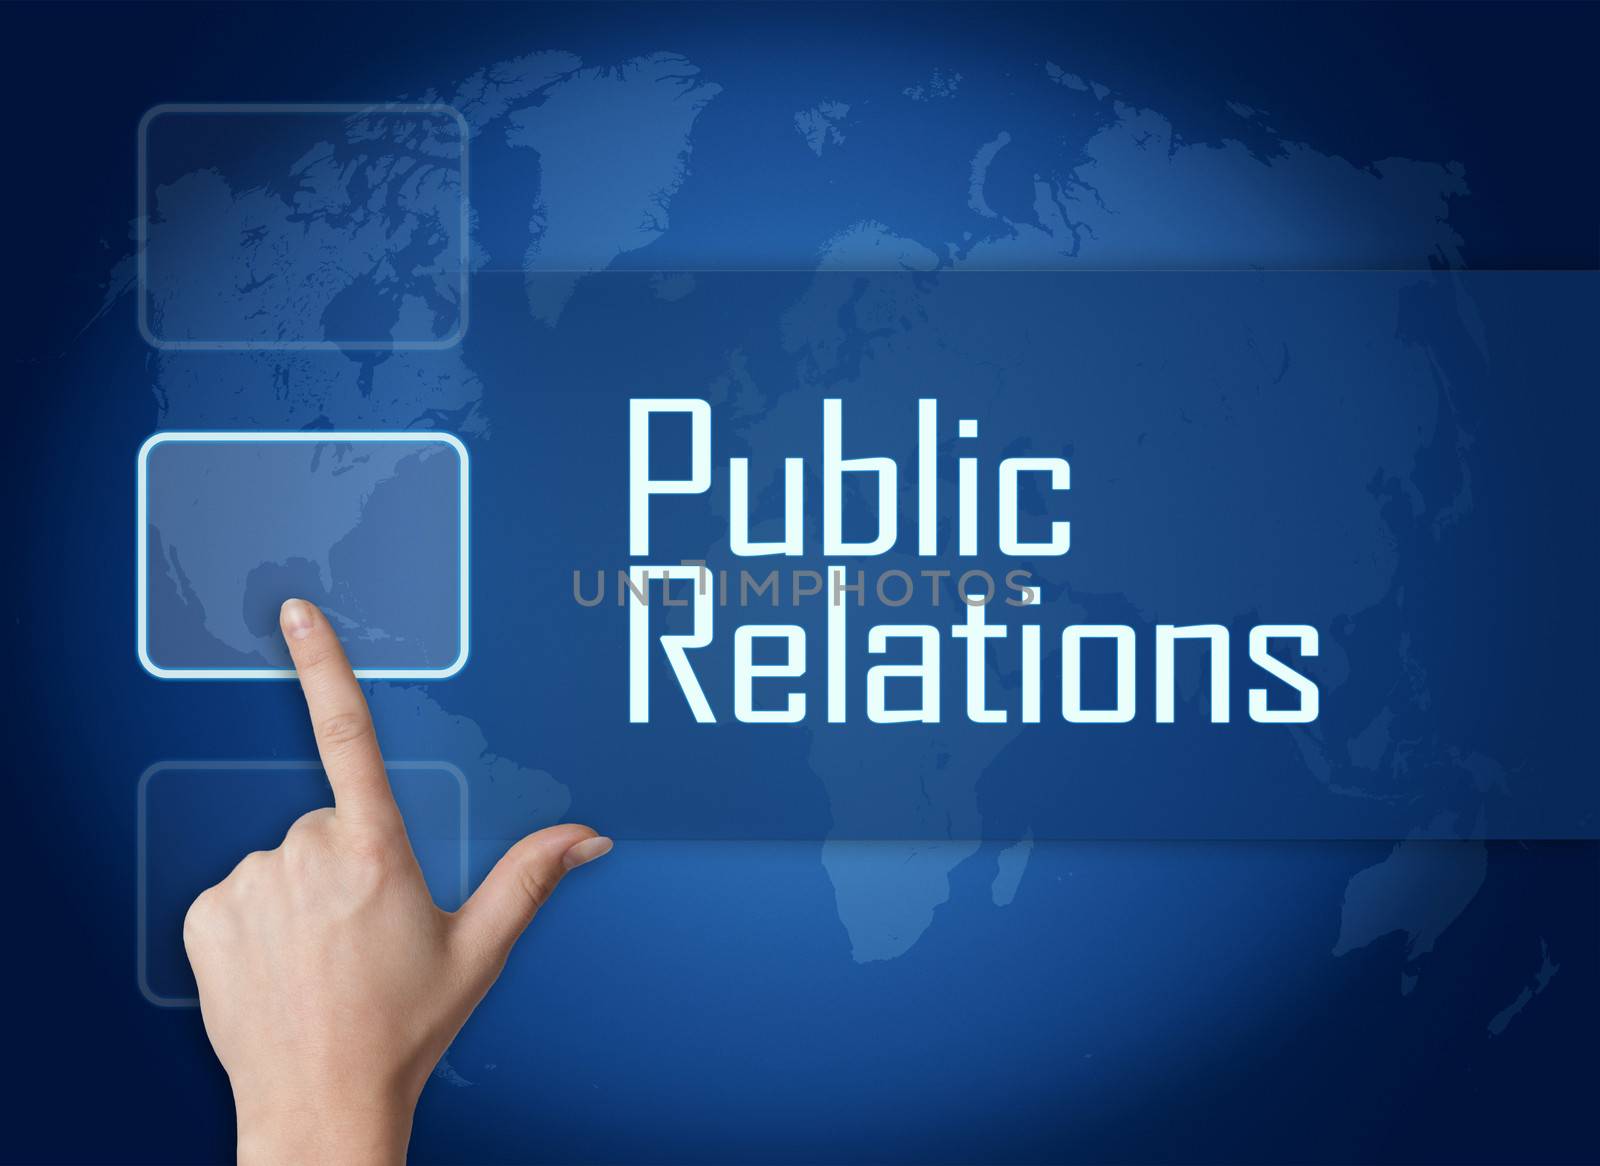 Public Relations concept with interface and world map on blue background